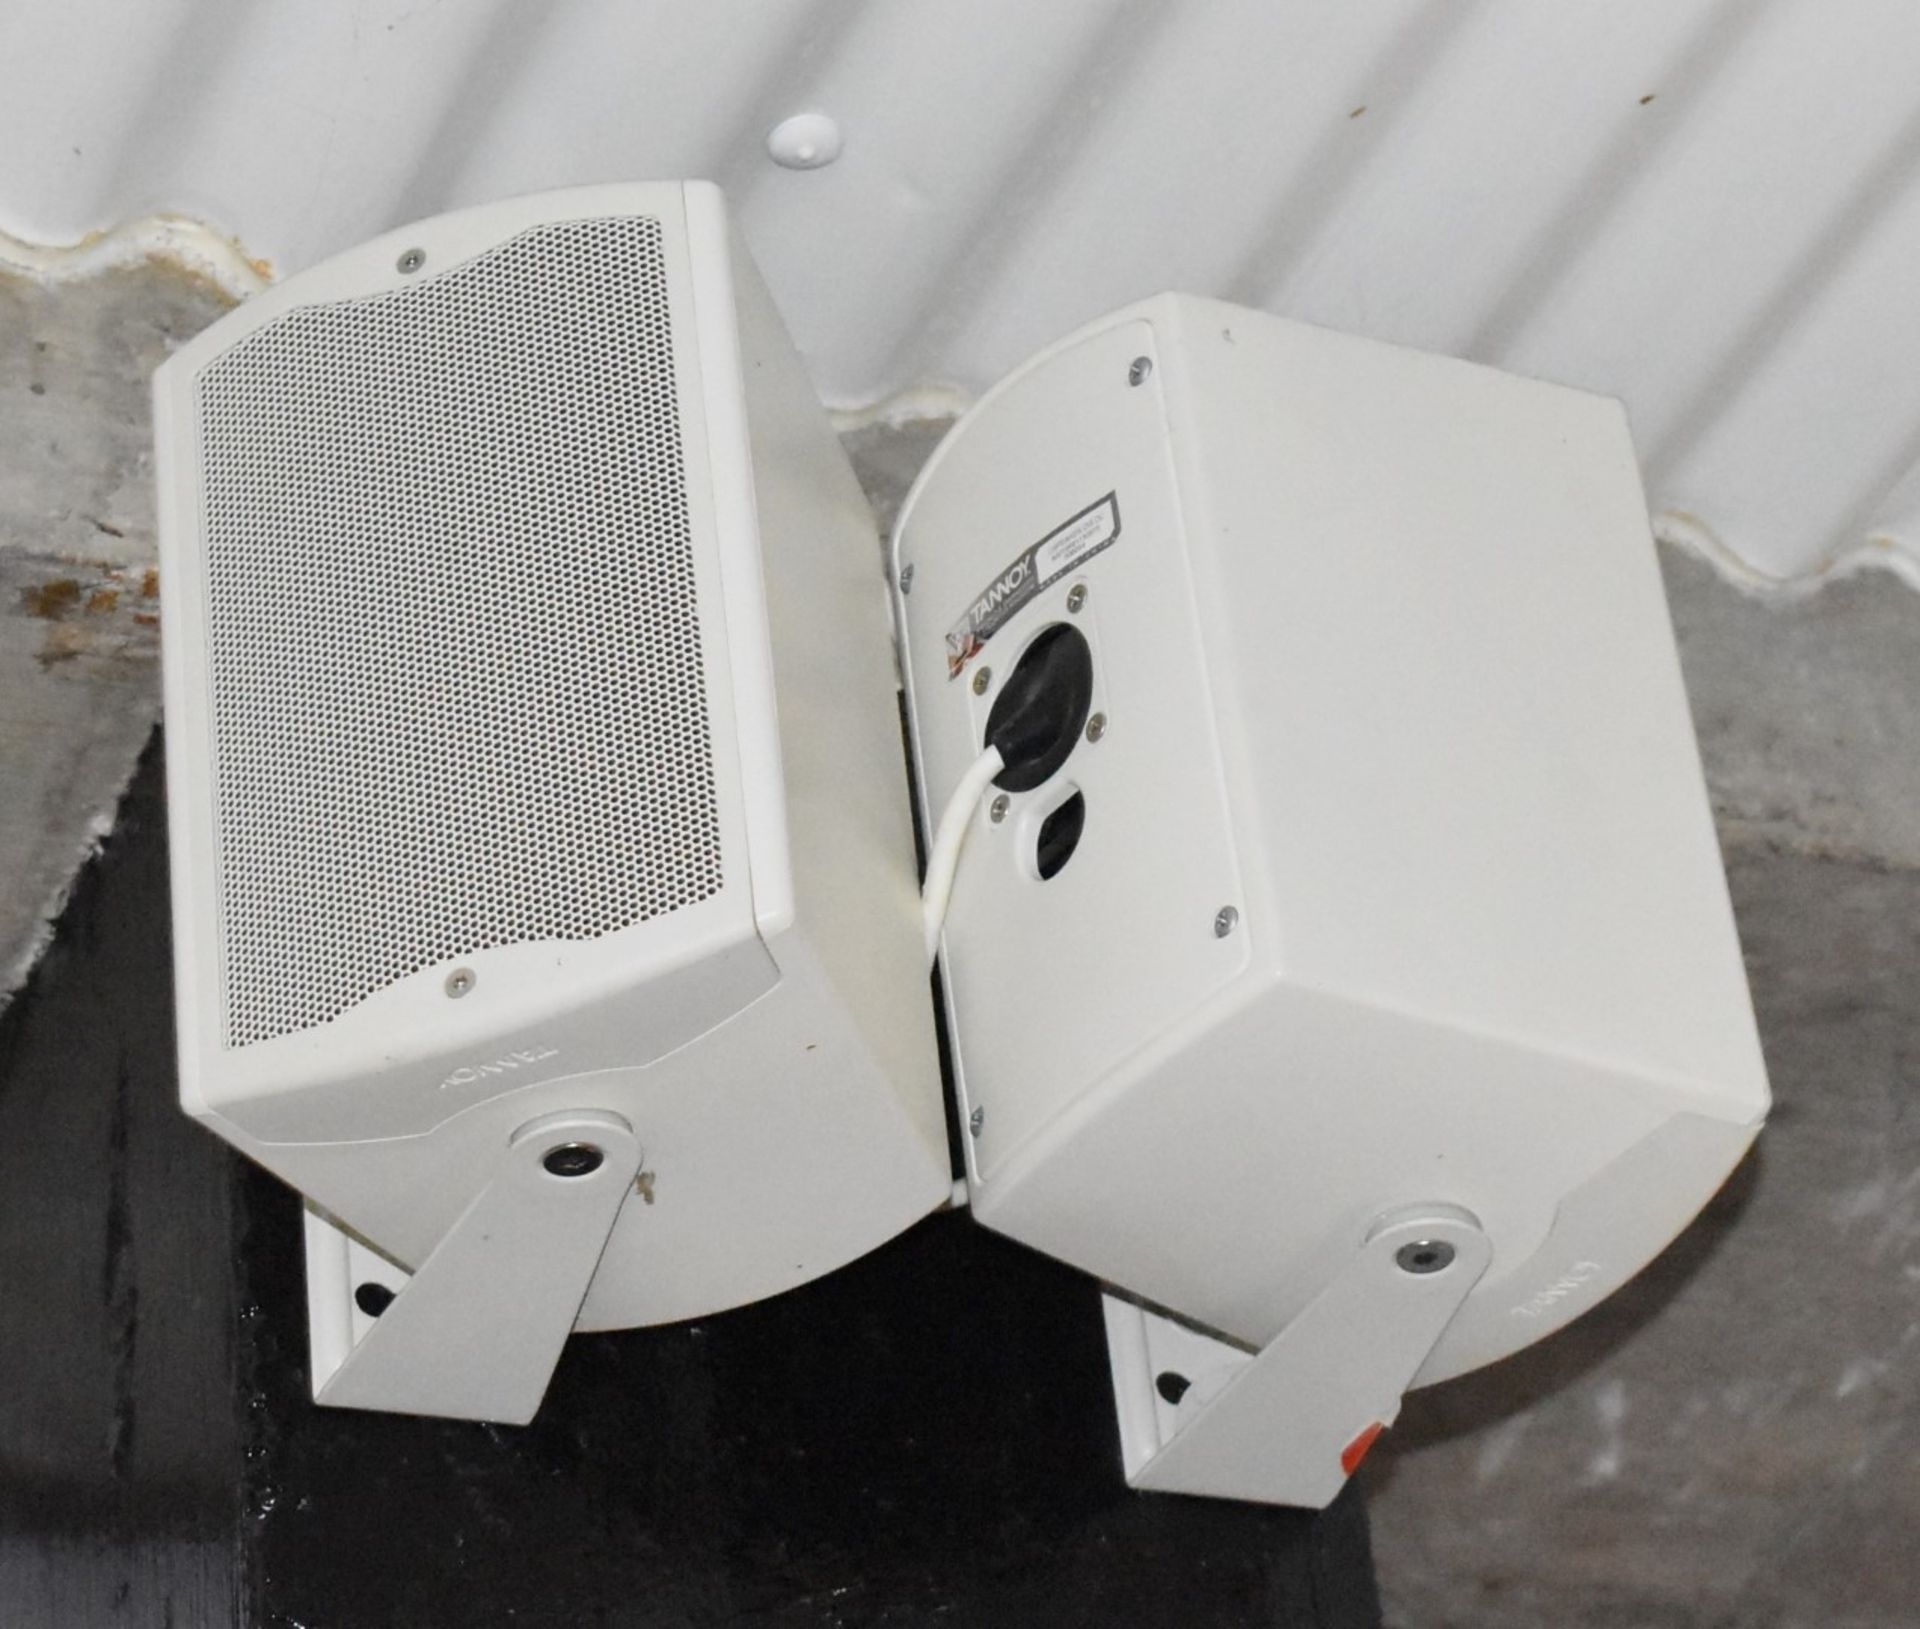 4 x Tannoy Di5 100w Loudspeakers With Wall Brackets - Image 2 of 3